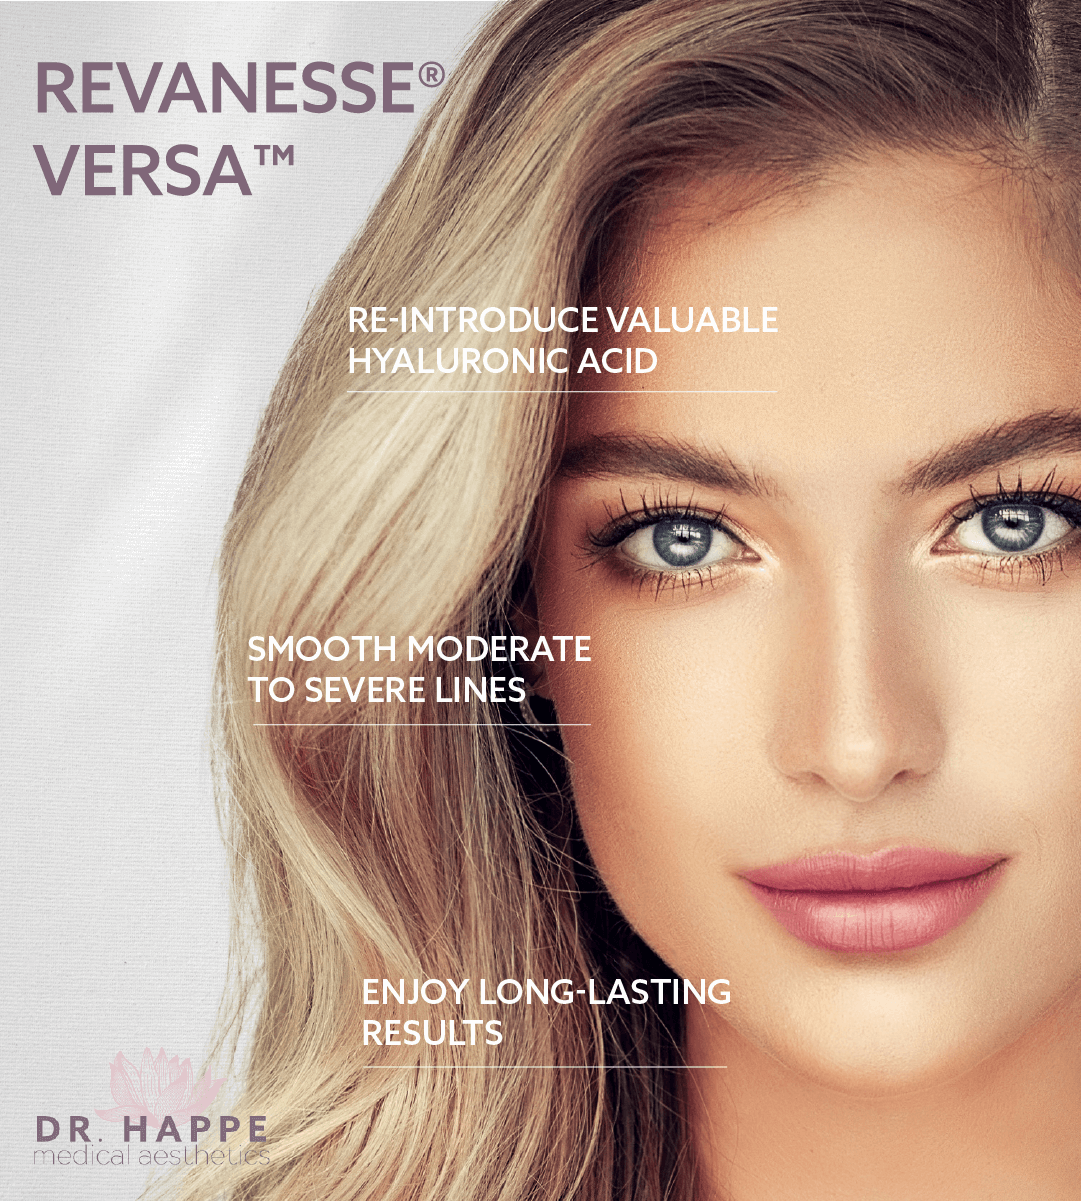 Discover Revanesse® Versa™ at the Newton and Boston area’s Dr. Happe Medical Aesthetics.